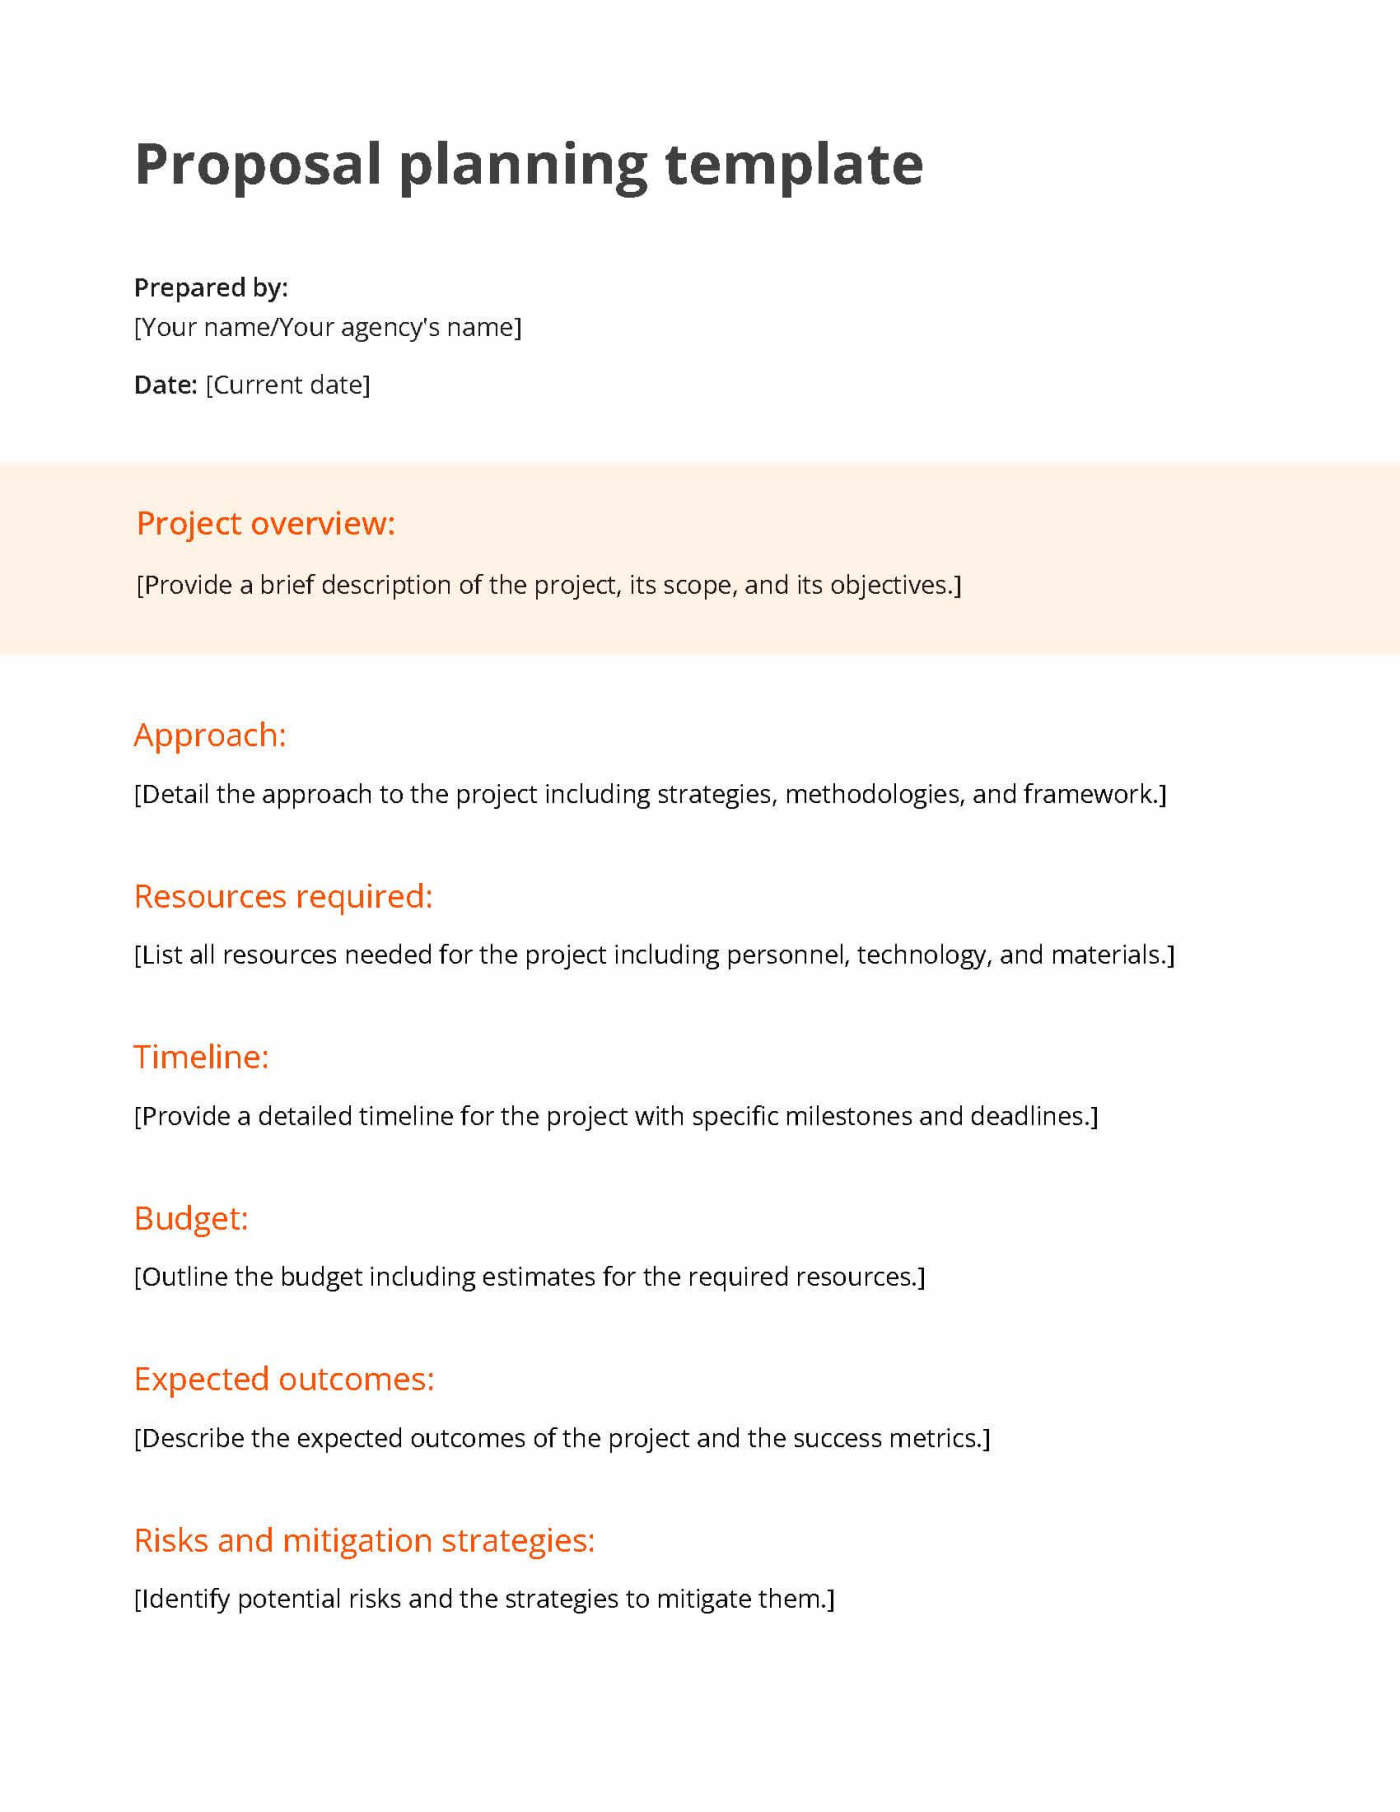 White and orange proposal planning template including a section for the project overview, approach, resources required and more